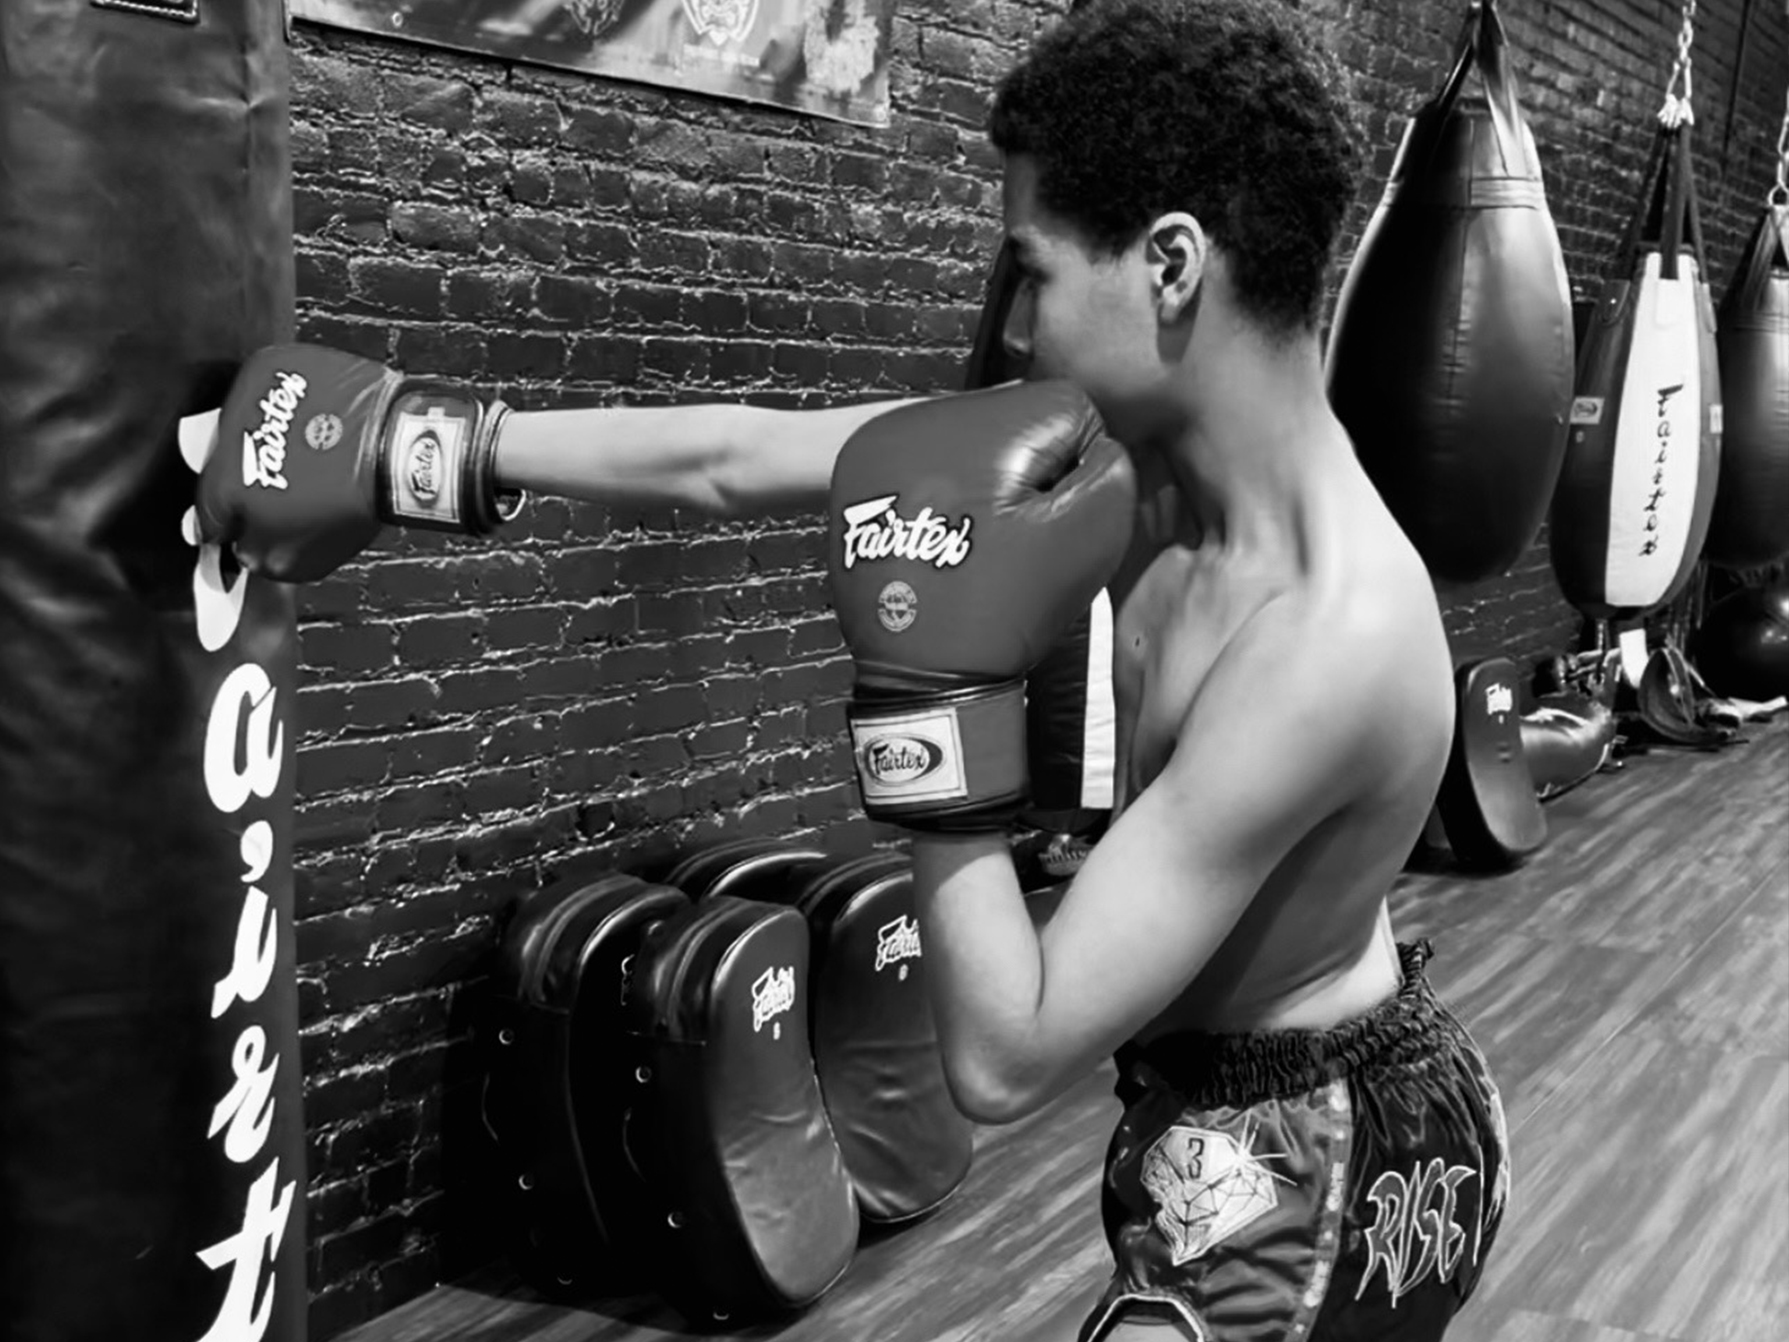  <h1>YOUTH PROGRAM</h1>Fun and skill filled class for 7-15 year olds. Students are taught beginner to intermediate level skills in this class through training on heavy bags, with partners on thai pads and simulated light contact exercises in a fun, safe environment which encourages respect, discipline and confidence. No previous experience required.